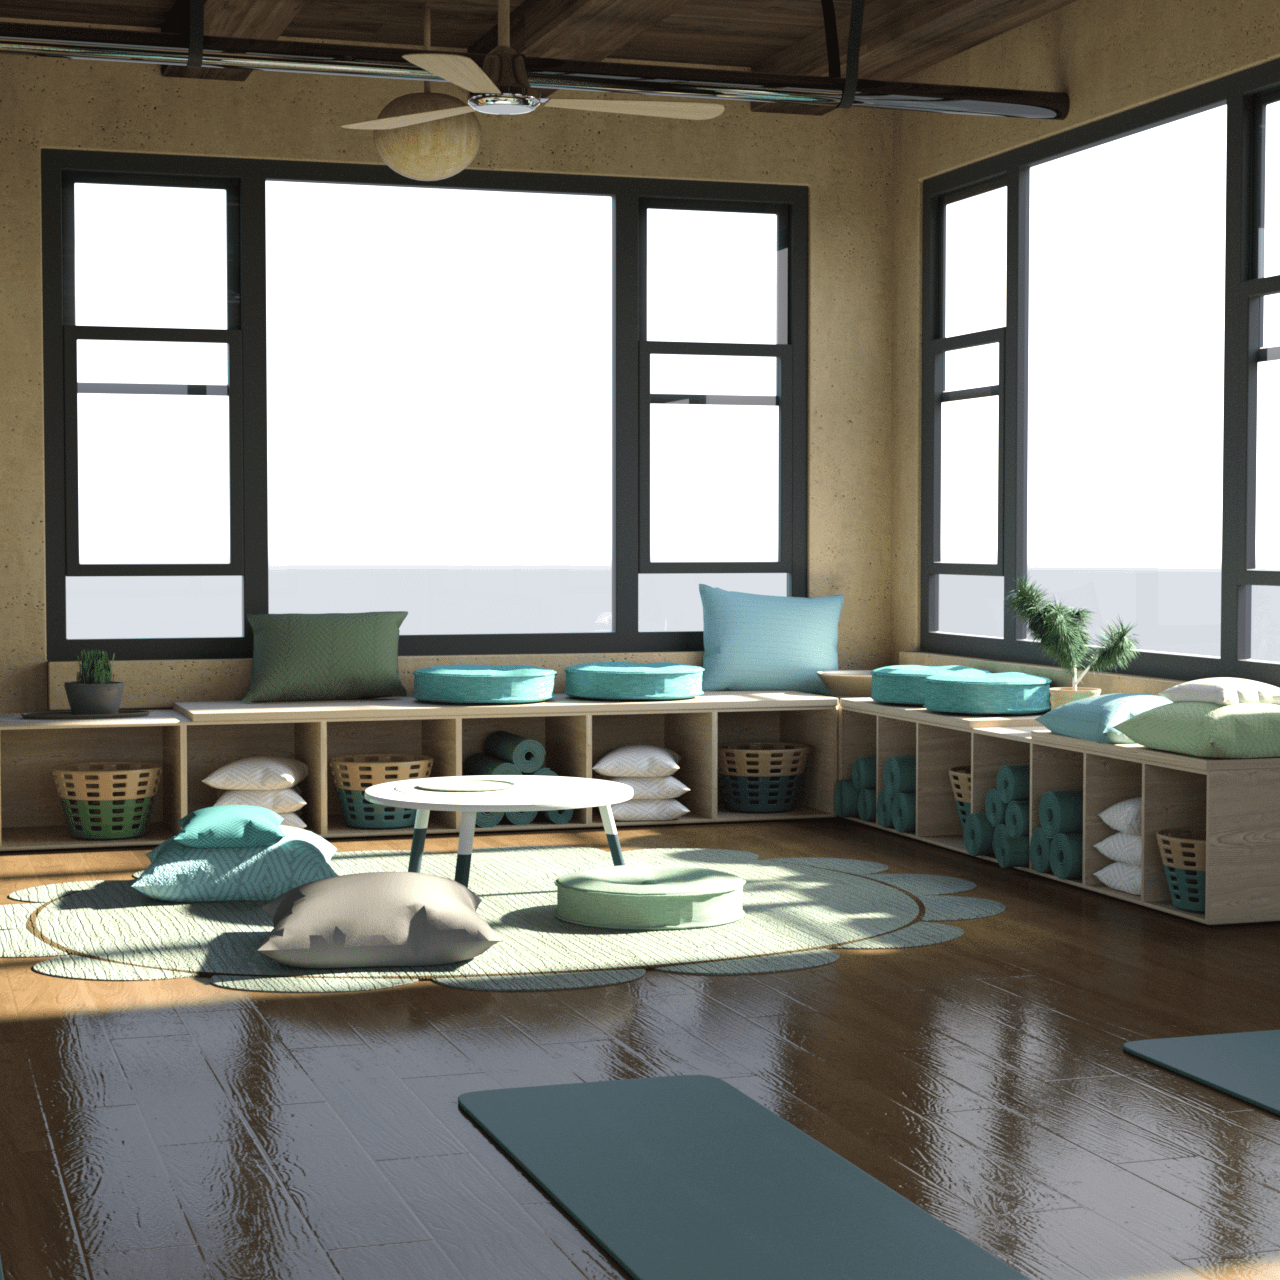 Another rendering of the yoga studio